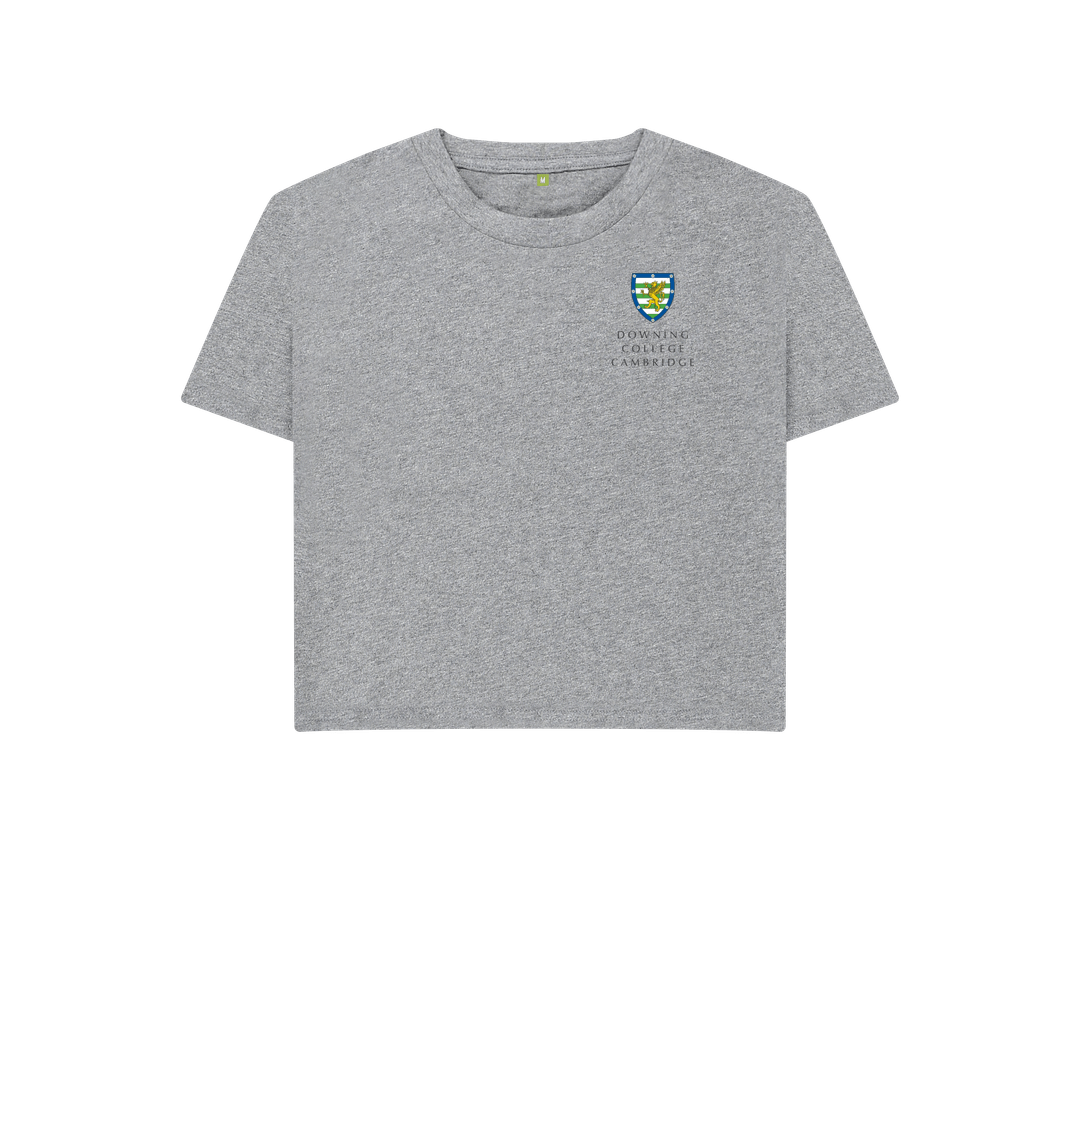 Athletic Grey Downing College Women's Boxy Tee